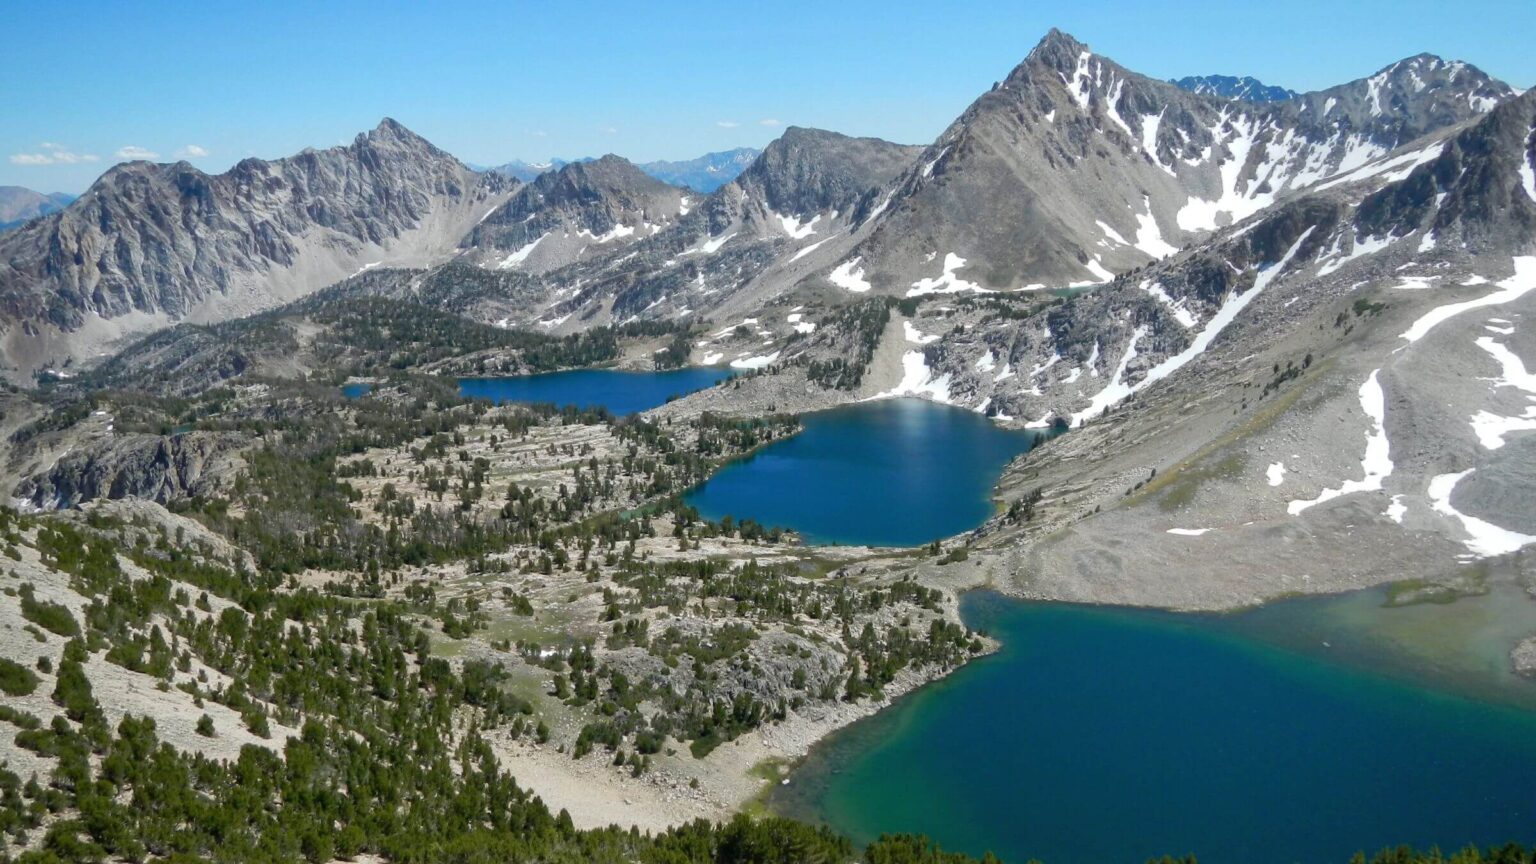 Idaho Cecil D. Andrus-White Clouds Wilderness, Big Boulder Lakes, July